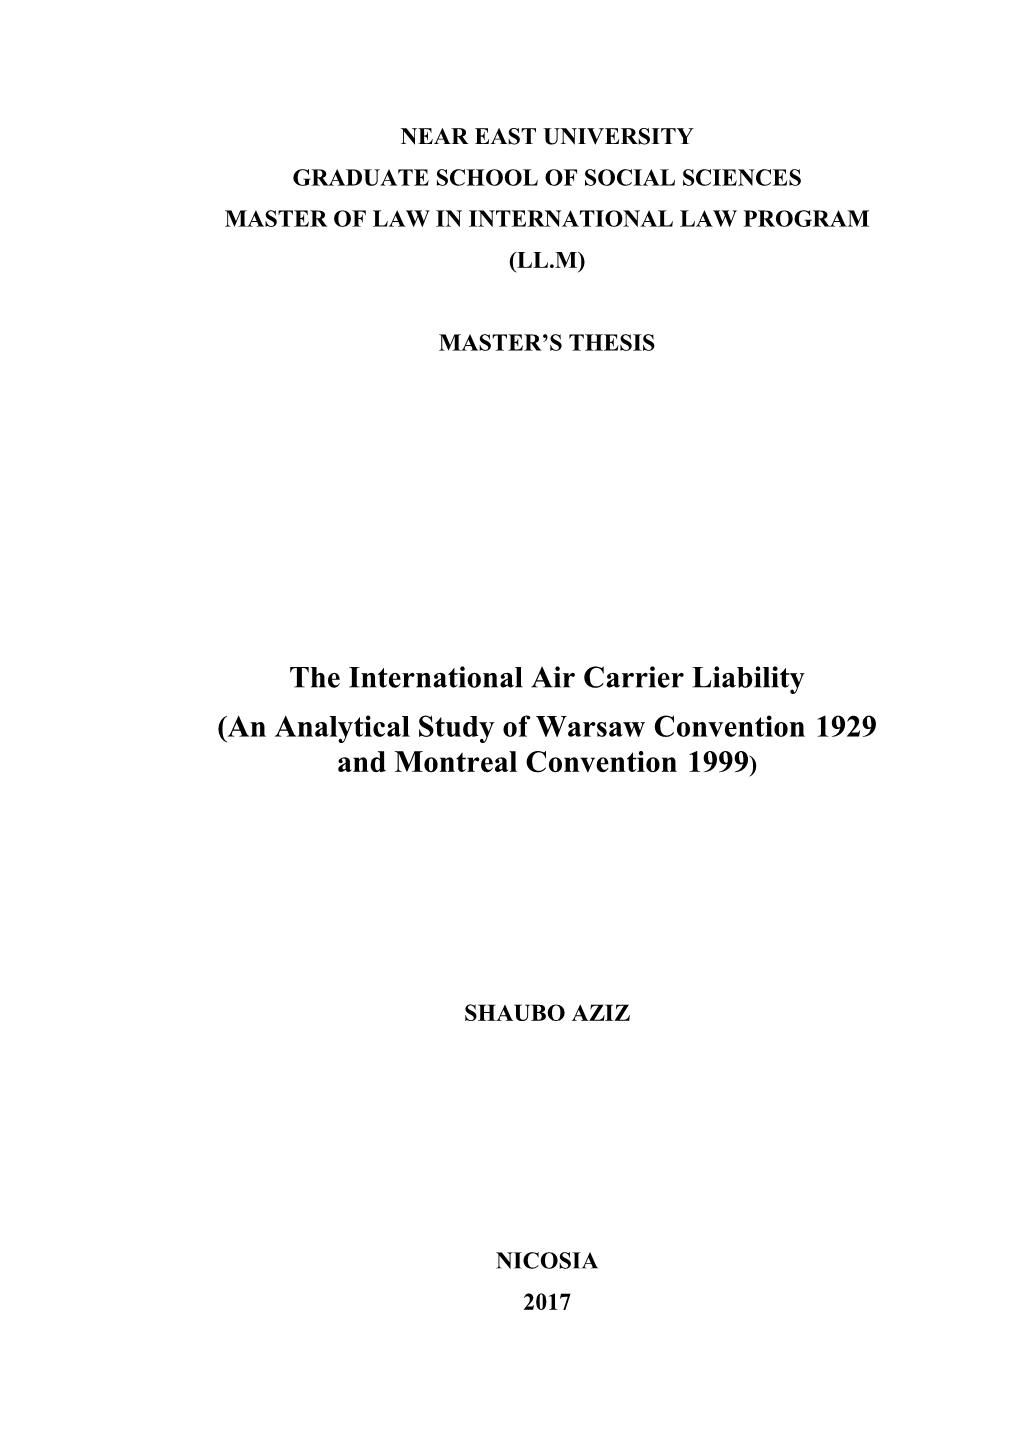 The International Air Carrier Liability (An Analytical Study of Warsaw Convention 1929 and Montreal Convention 1999)